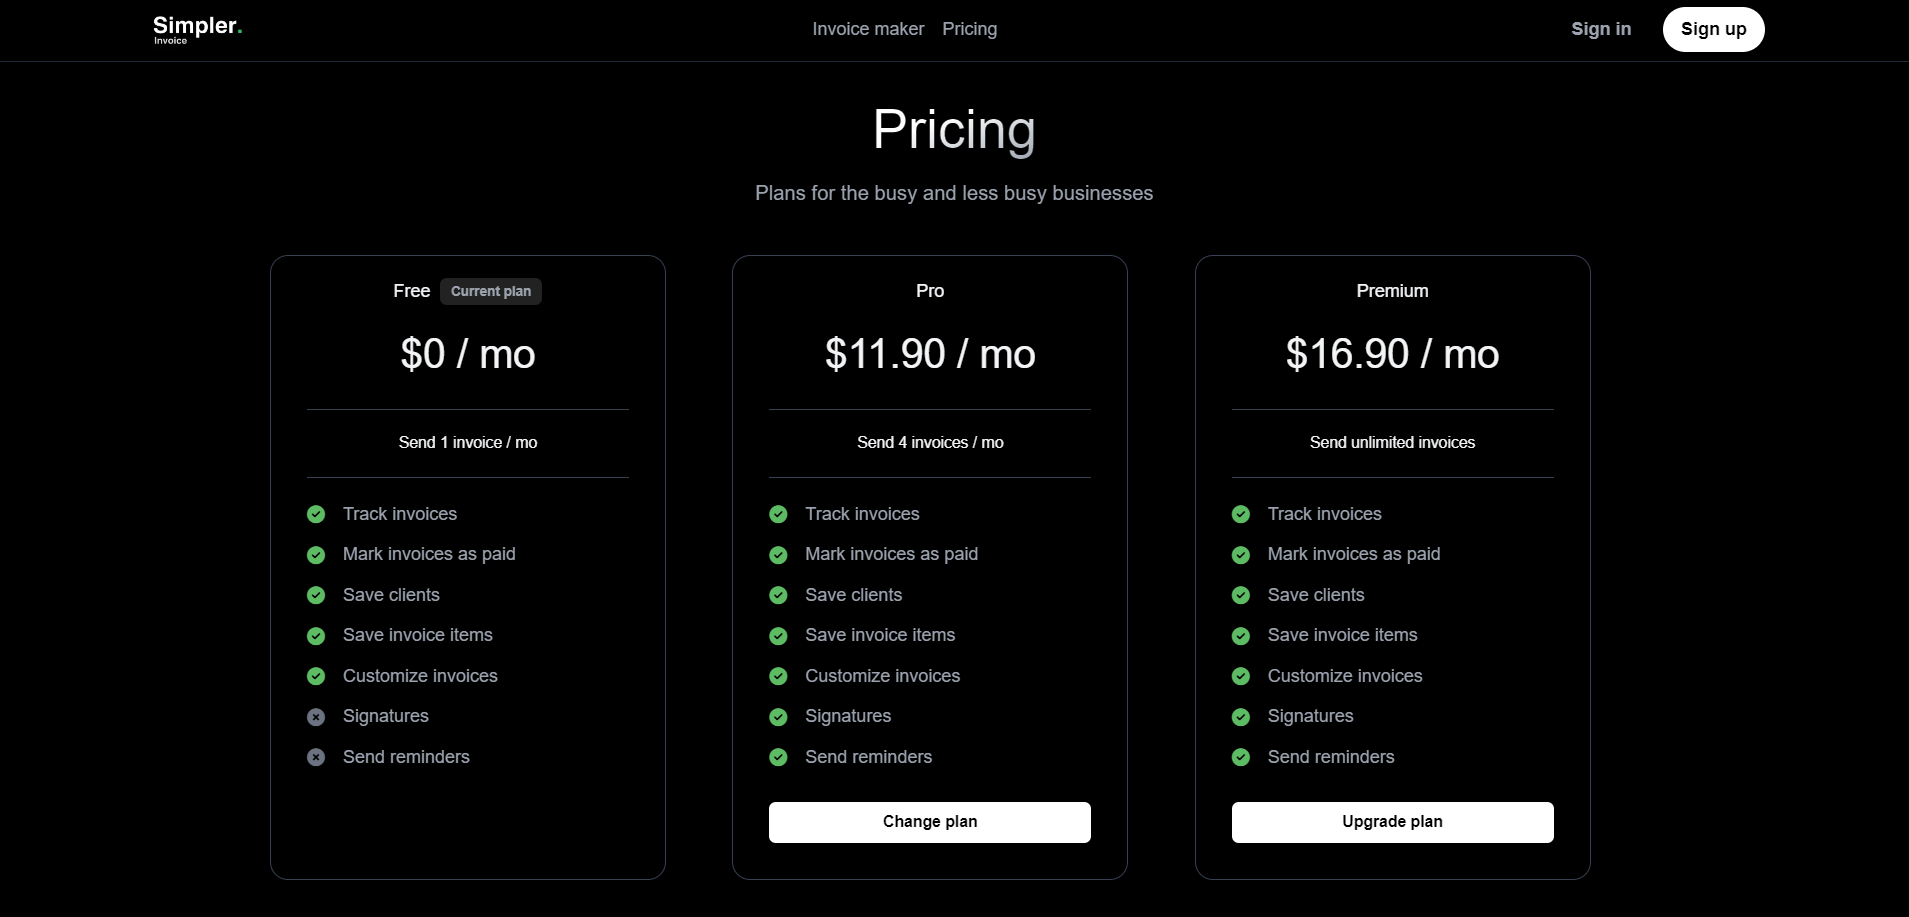 Simpler Invoice Simpler Invoice pricing